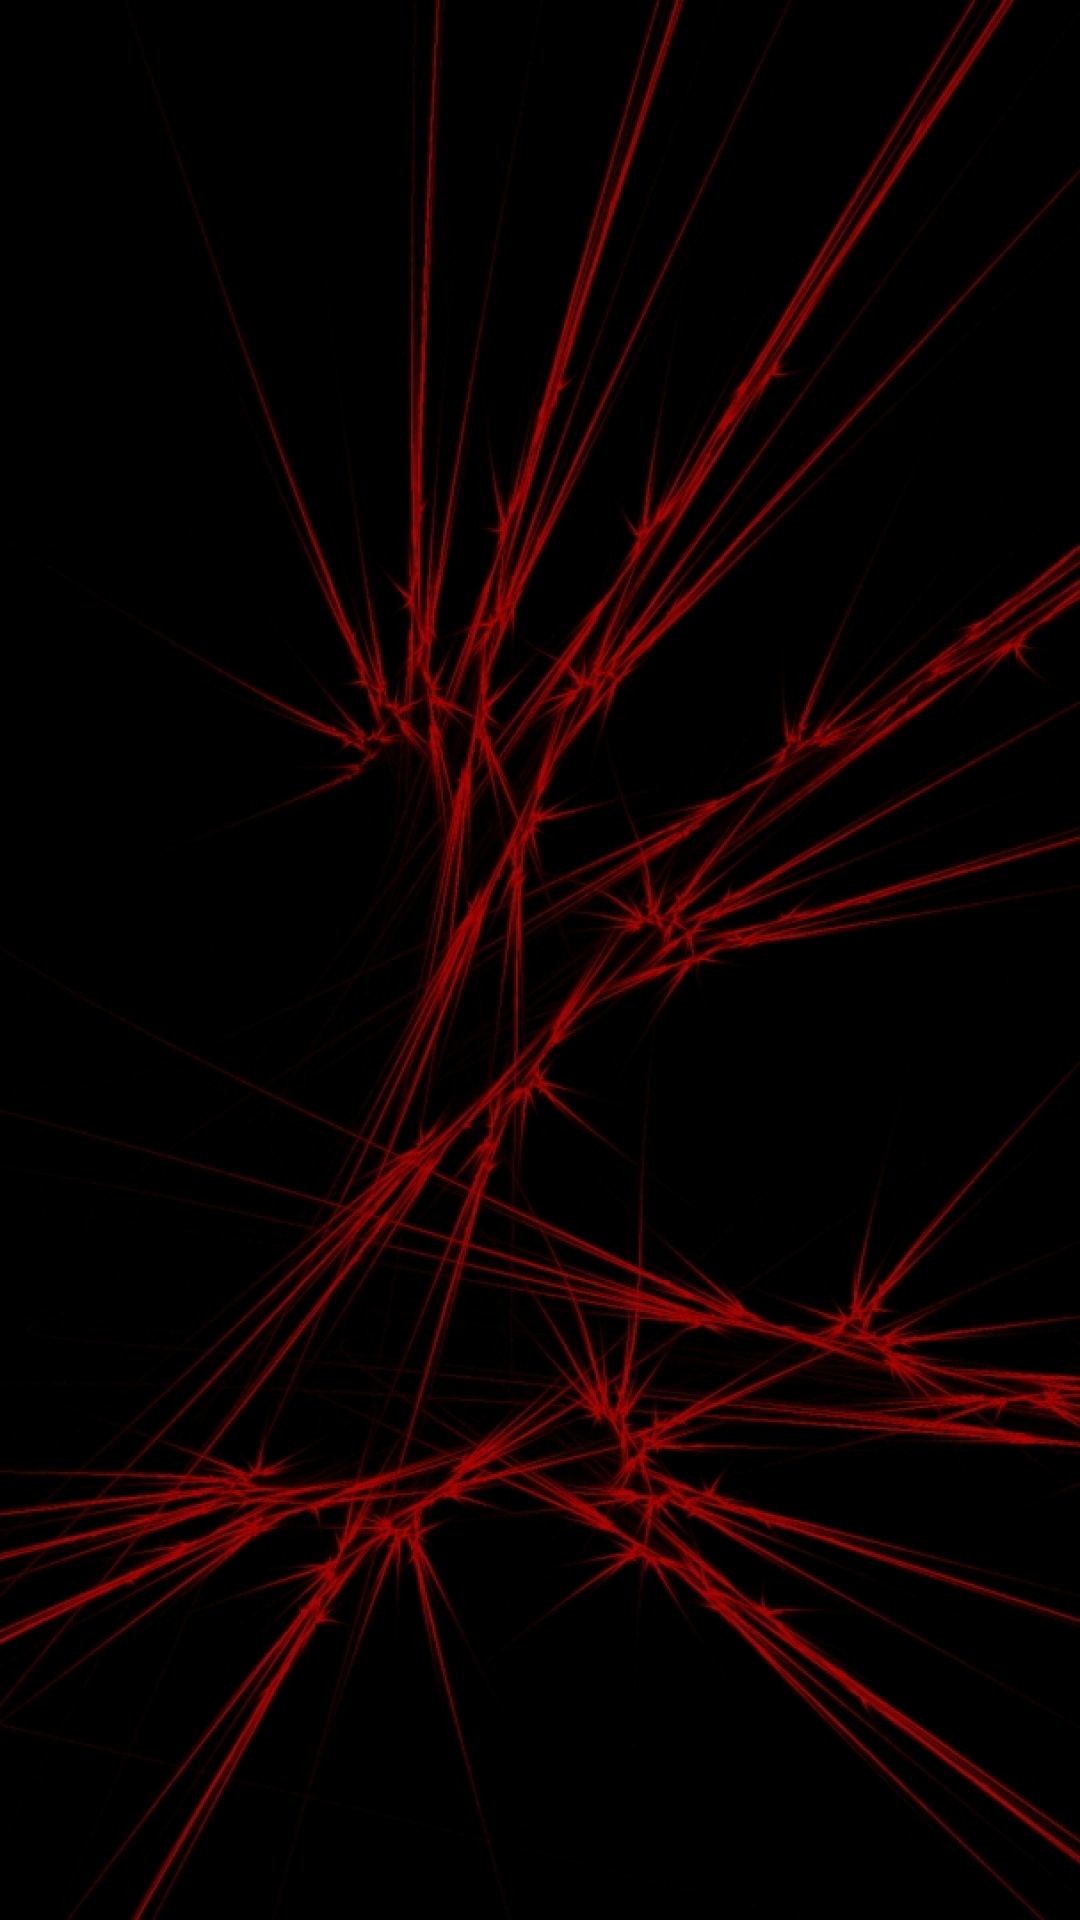 1080x1920 Black And Red Hd Wallpaper For Android Phone - impremedia.net